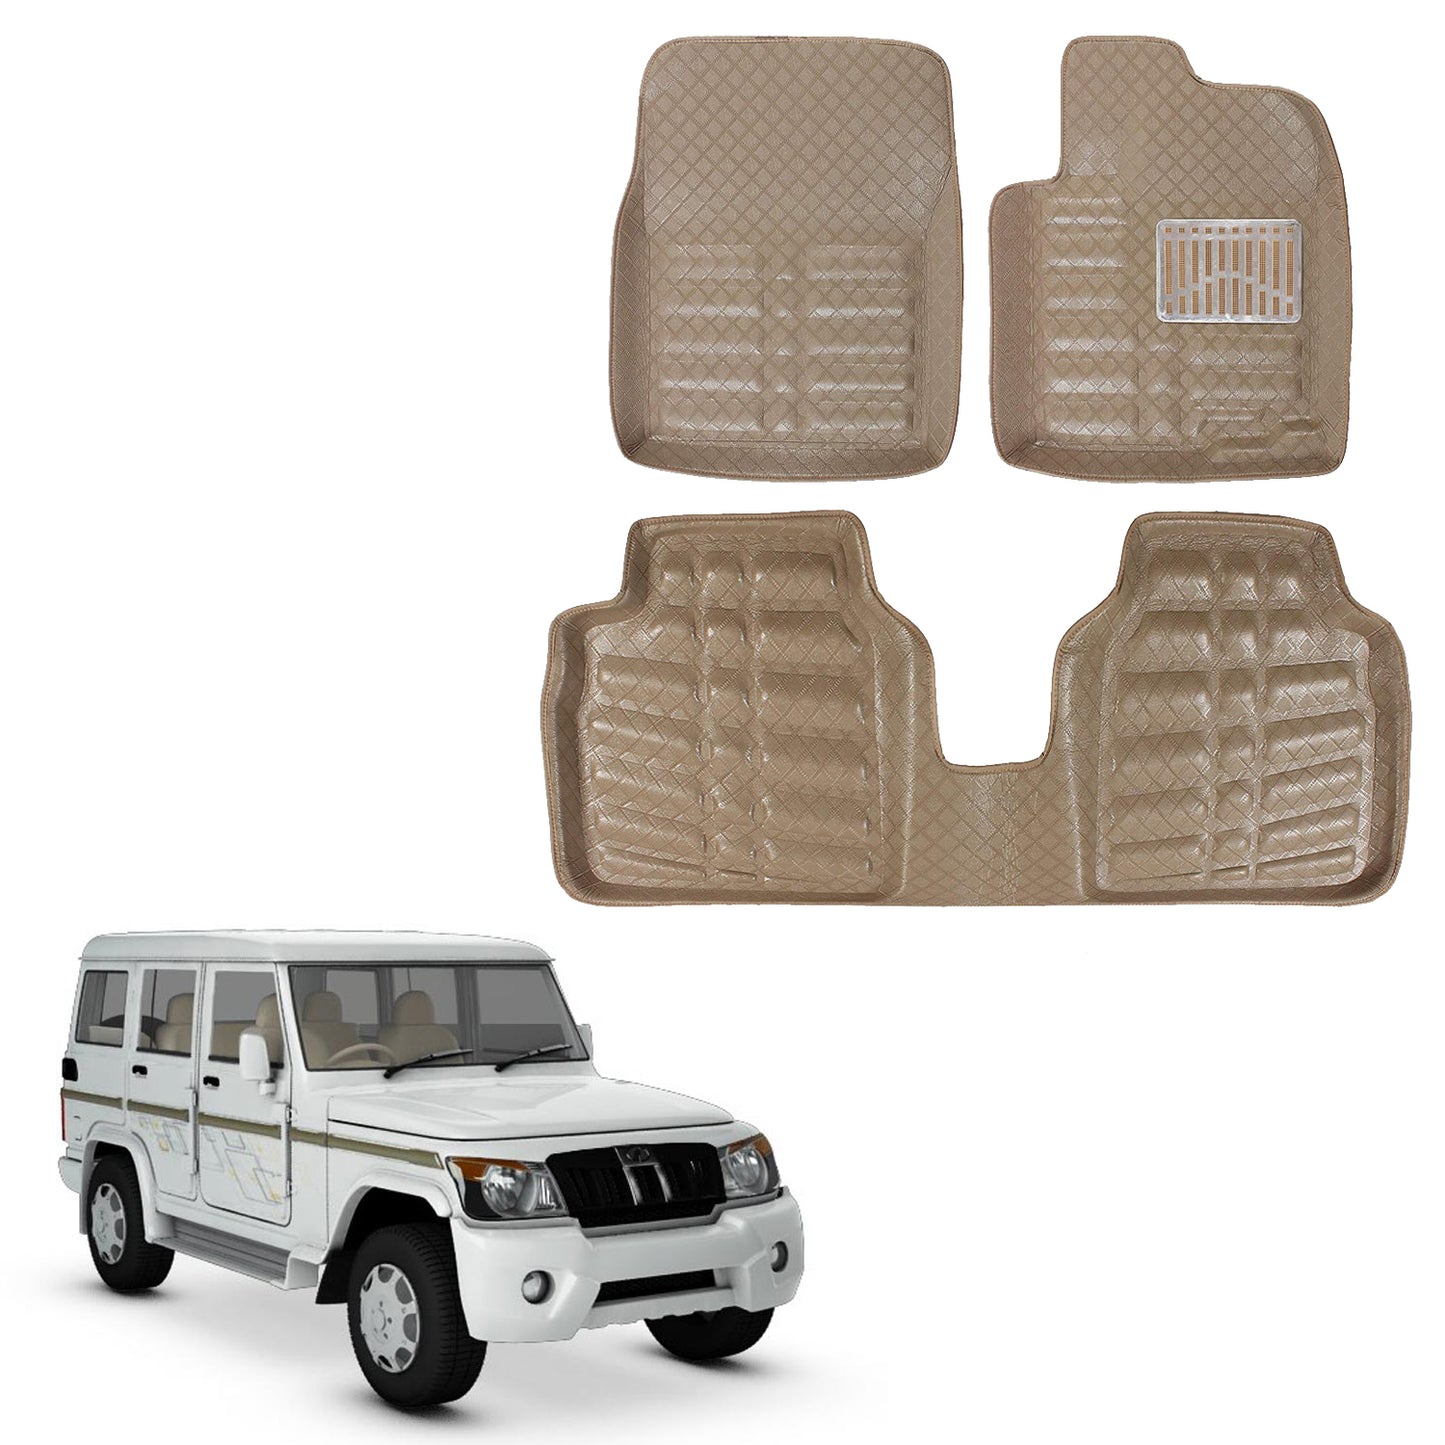 Oshotto 4D Artificial Leather Car Floor Mats For Mahindra Bolero - Set of 4 (Complete Mat with Dicky) - Beige